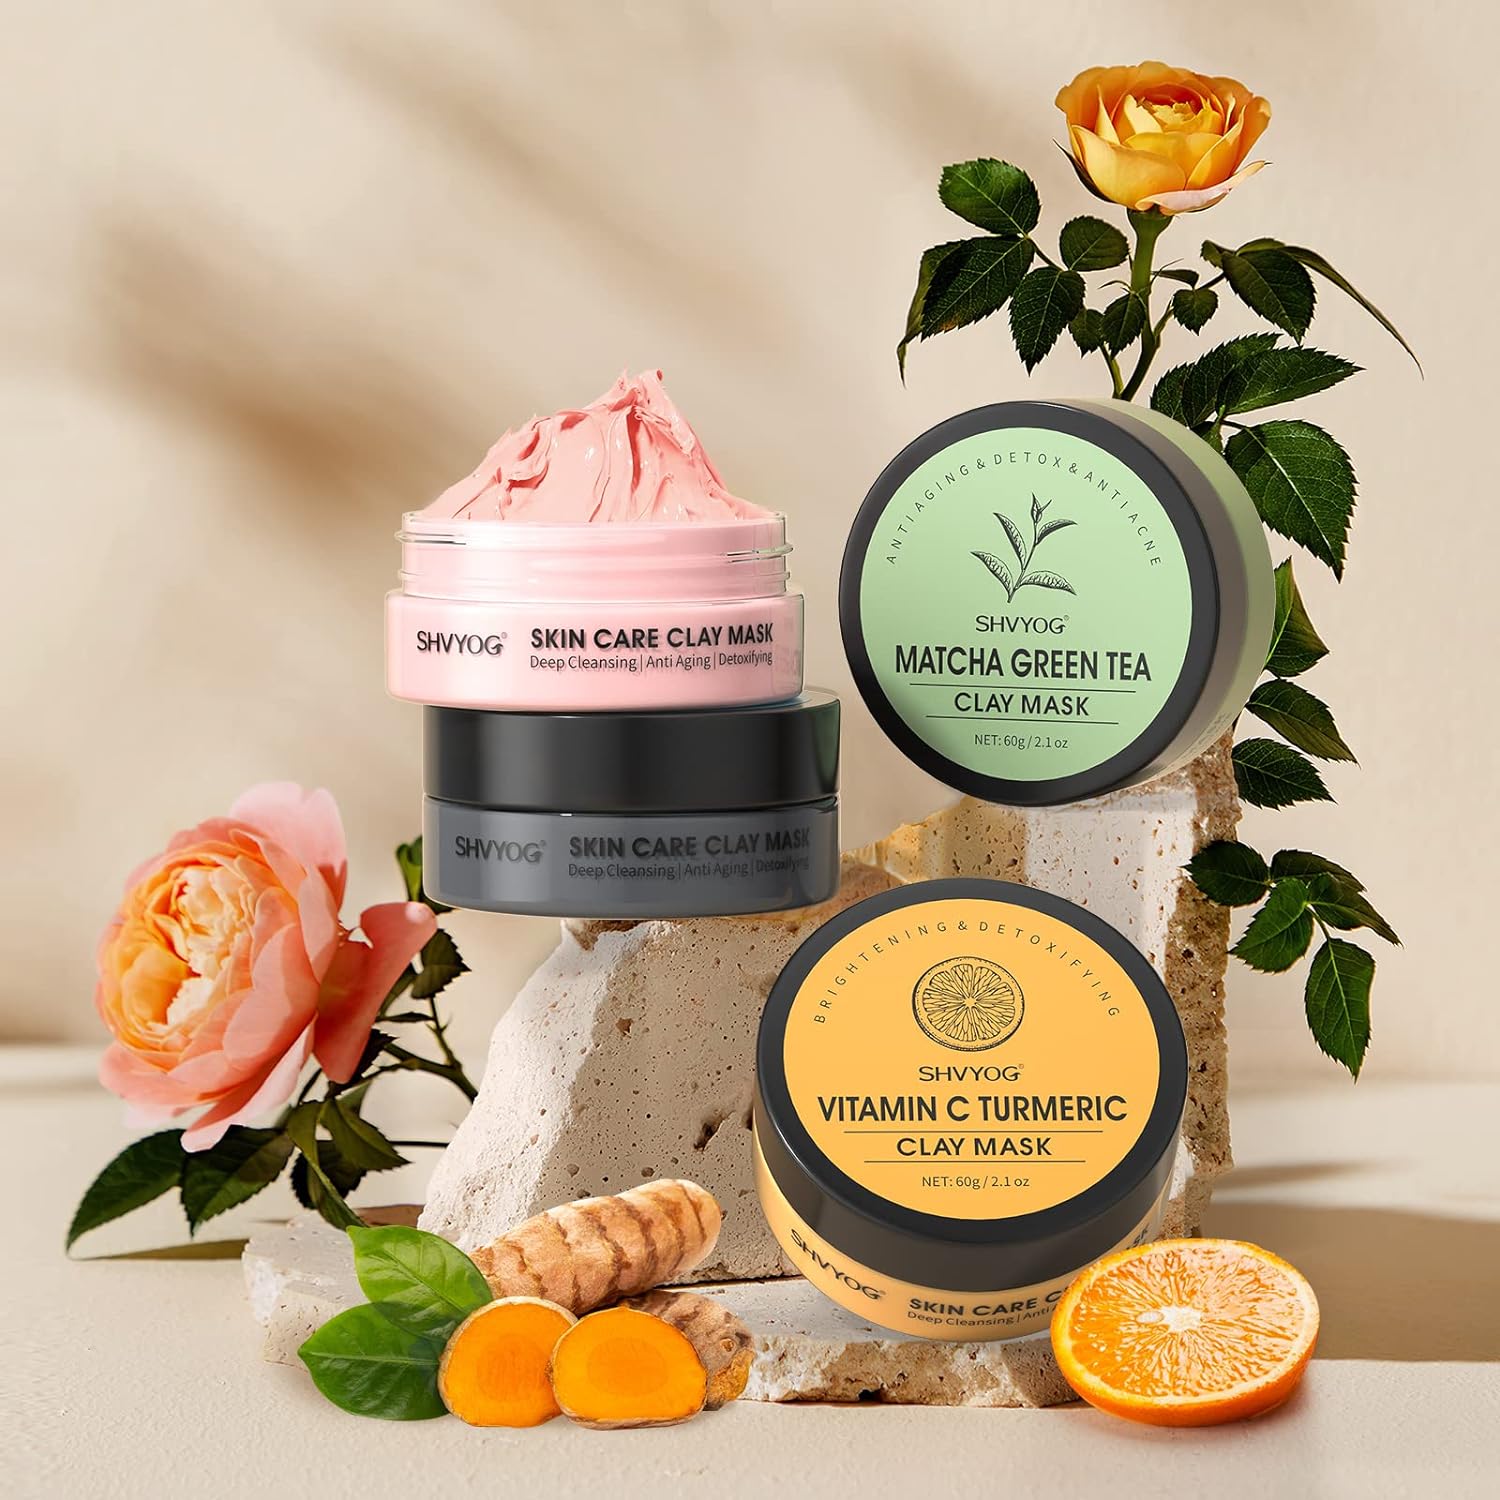 4 Pcs Clay Mask Gift Set, Turmeric Vitamin C Clay Mask, Green Tea Mask, Dead Sea Mud Mask, Rose Clay Mask, Face Masks Skincare Clay Facial Mask for Deep Cleansing, Moisturizing and Refining Pores 240G